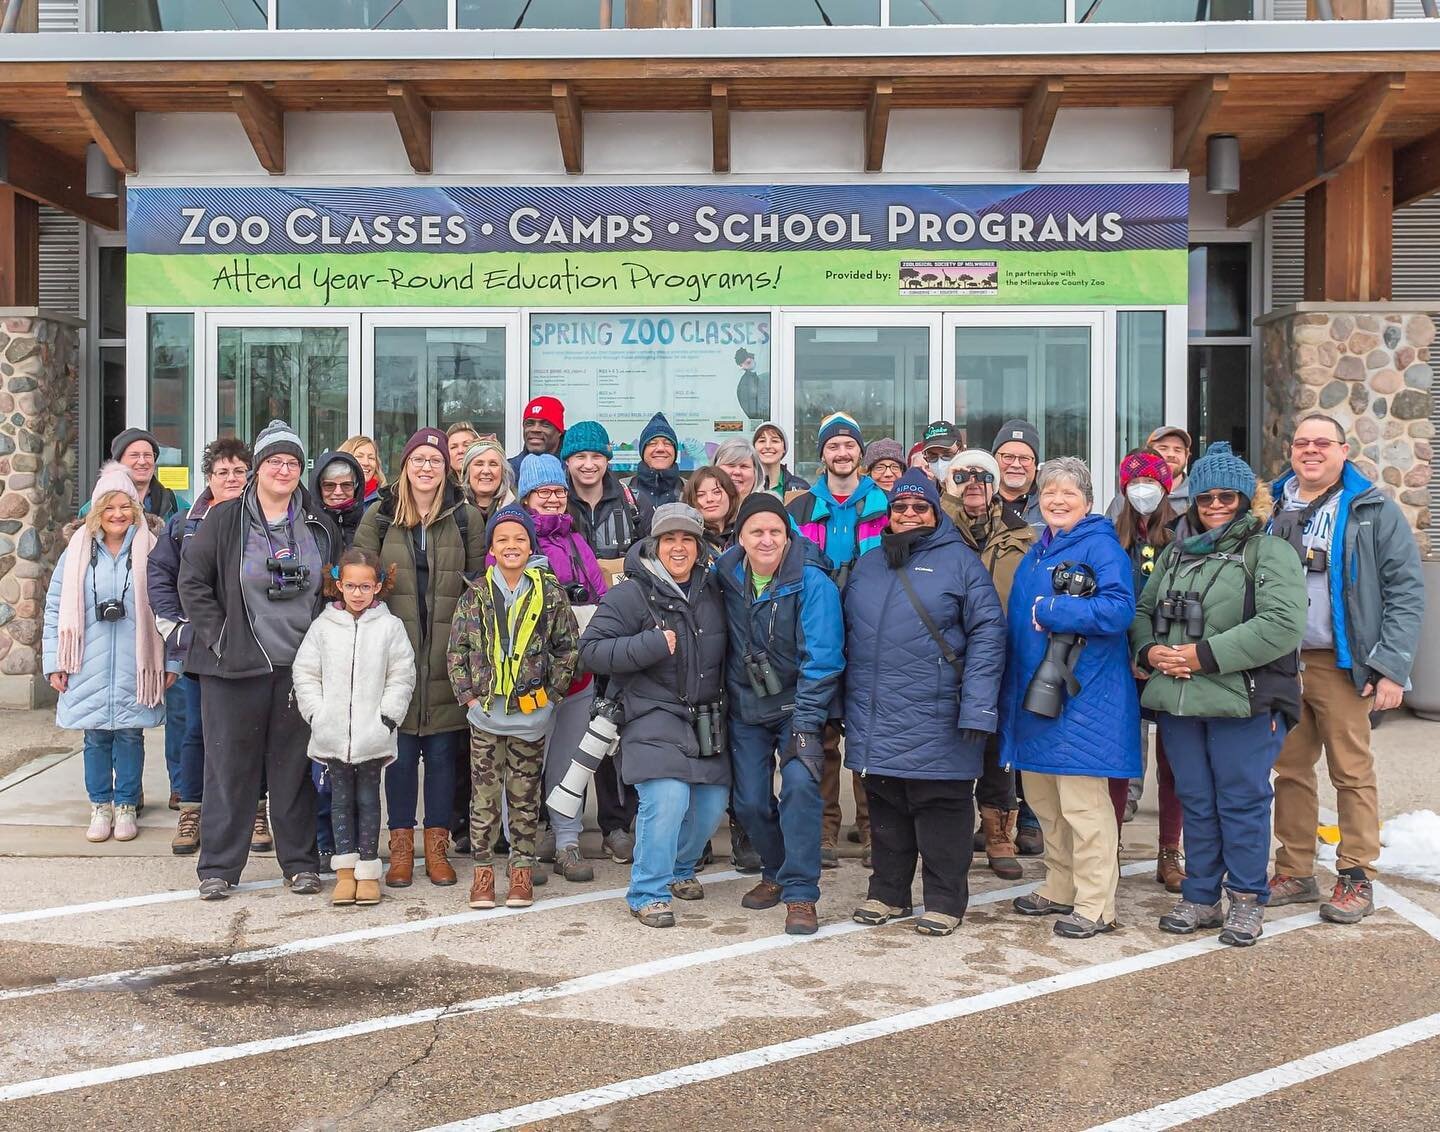 36 bird nerds came to bird the @milwaukeecozoo on Saturday. We were led by the hospitable Zoo staff, and spent a lot of time touring the aviary.  Of the native birds, we all agreed that the Ring-necked Duck was the favorite. Here's the list of the 20